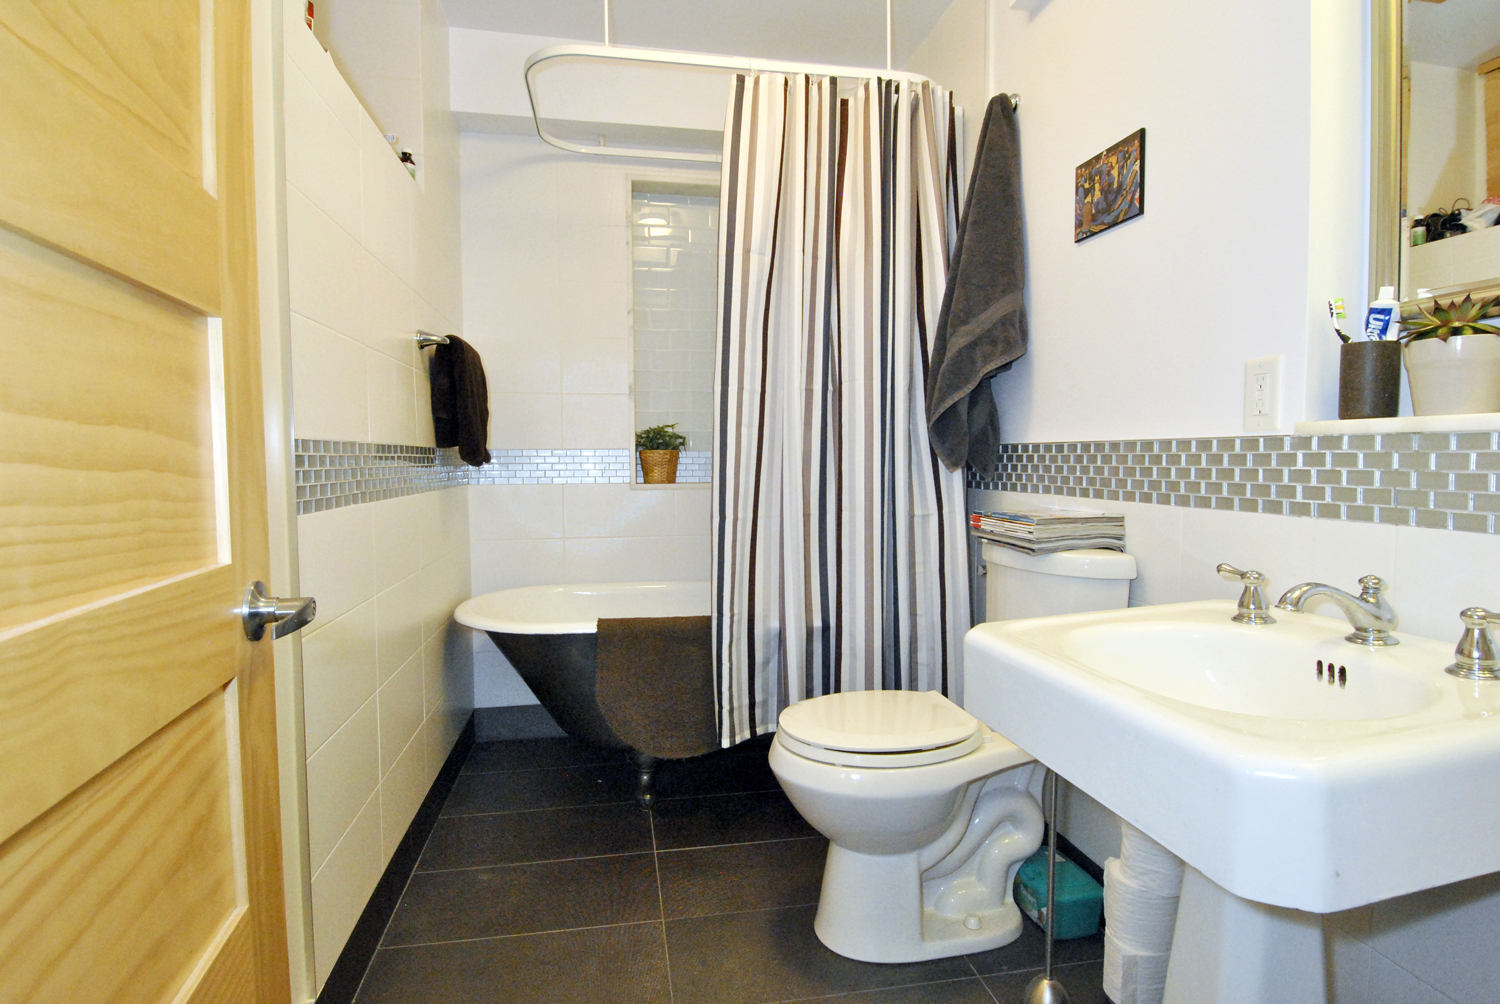 Basement apartment bathroom with claw-foot bathtub and sink area